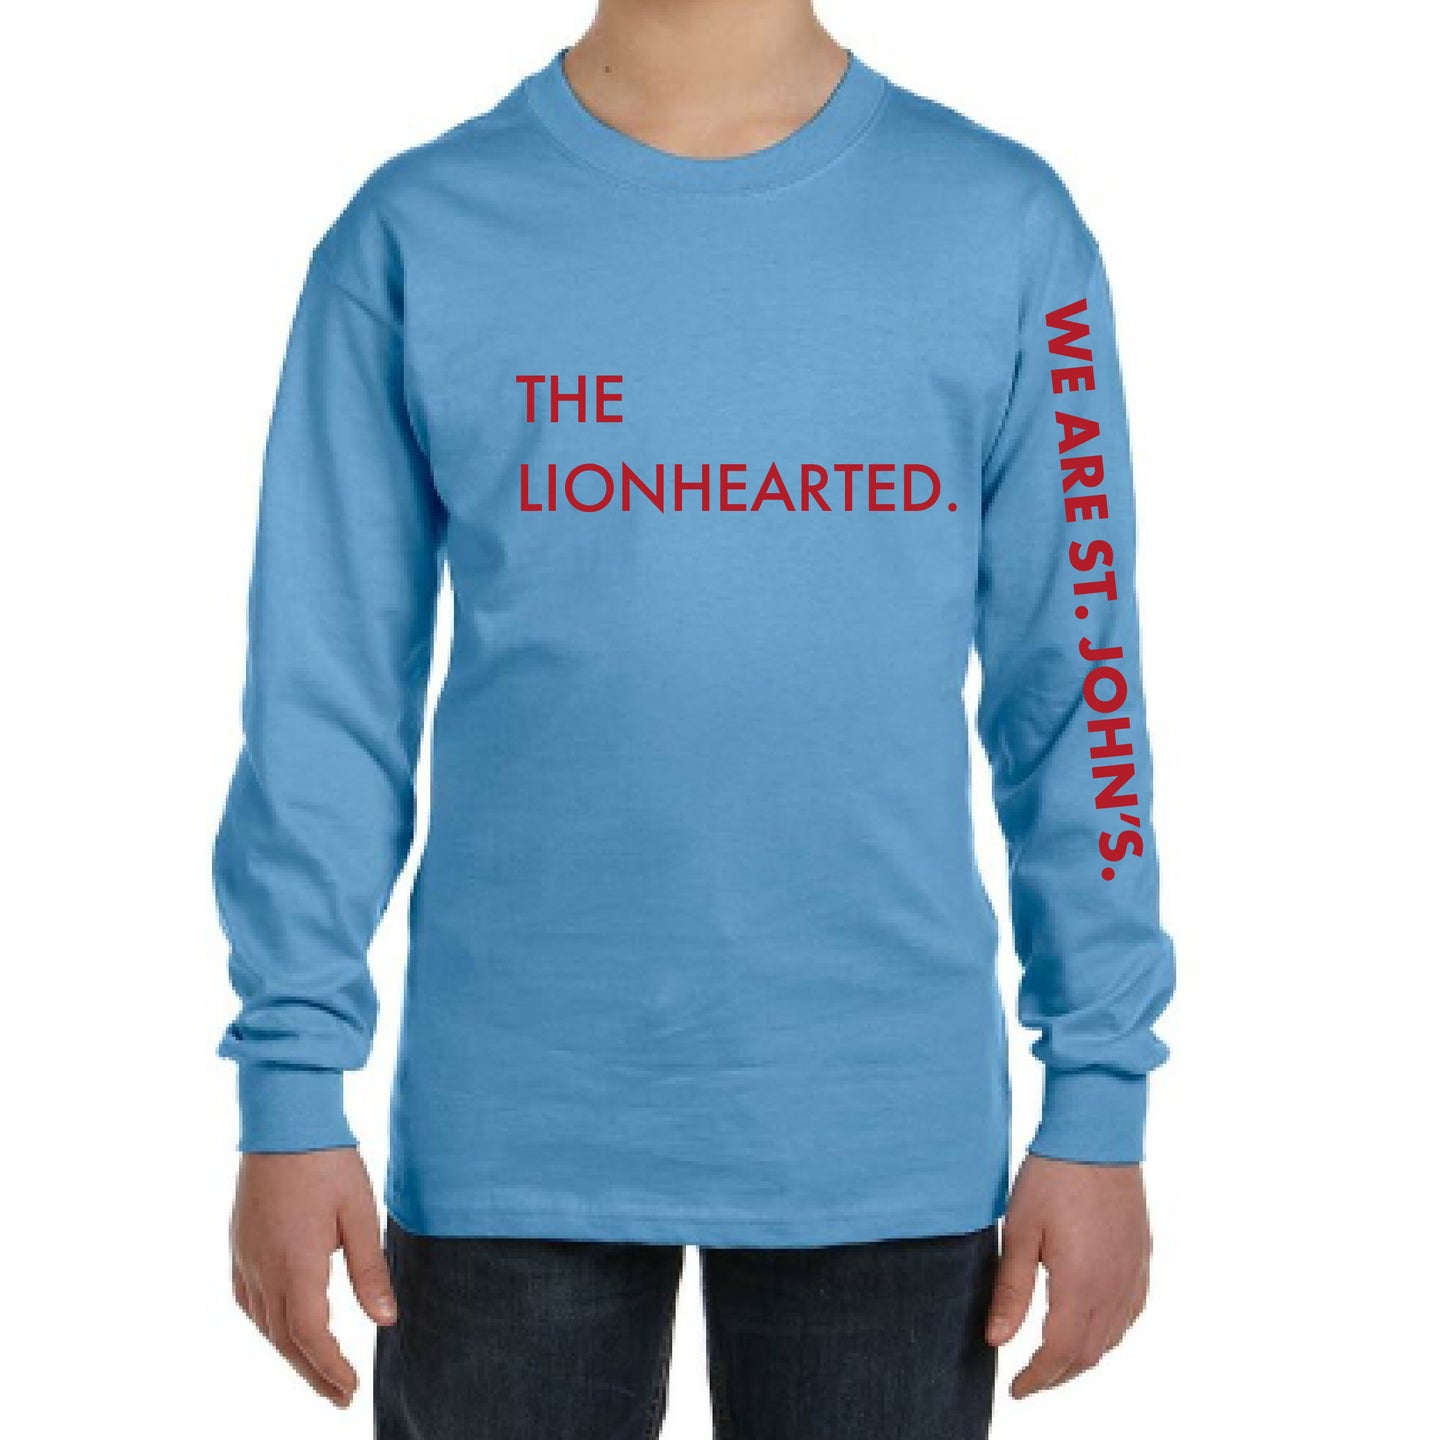 LIONHEARTED VALUES LONG-SLEEVE SPIRIT SHIRT - Youth